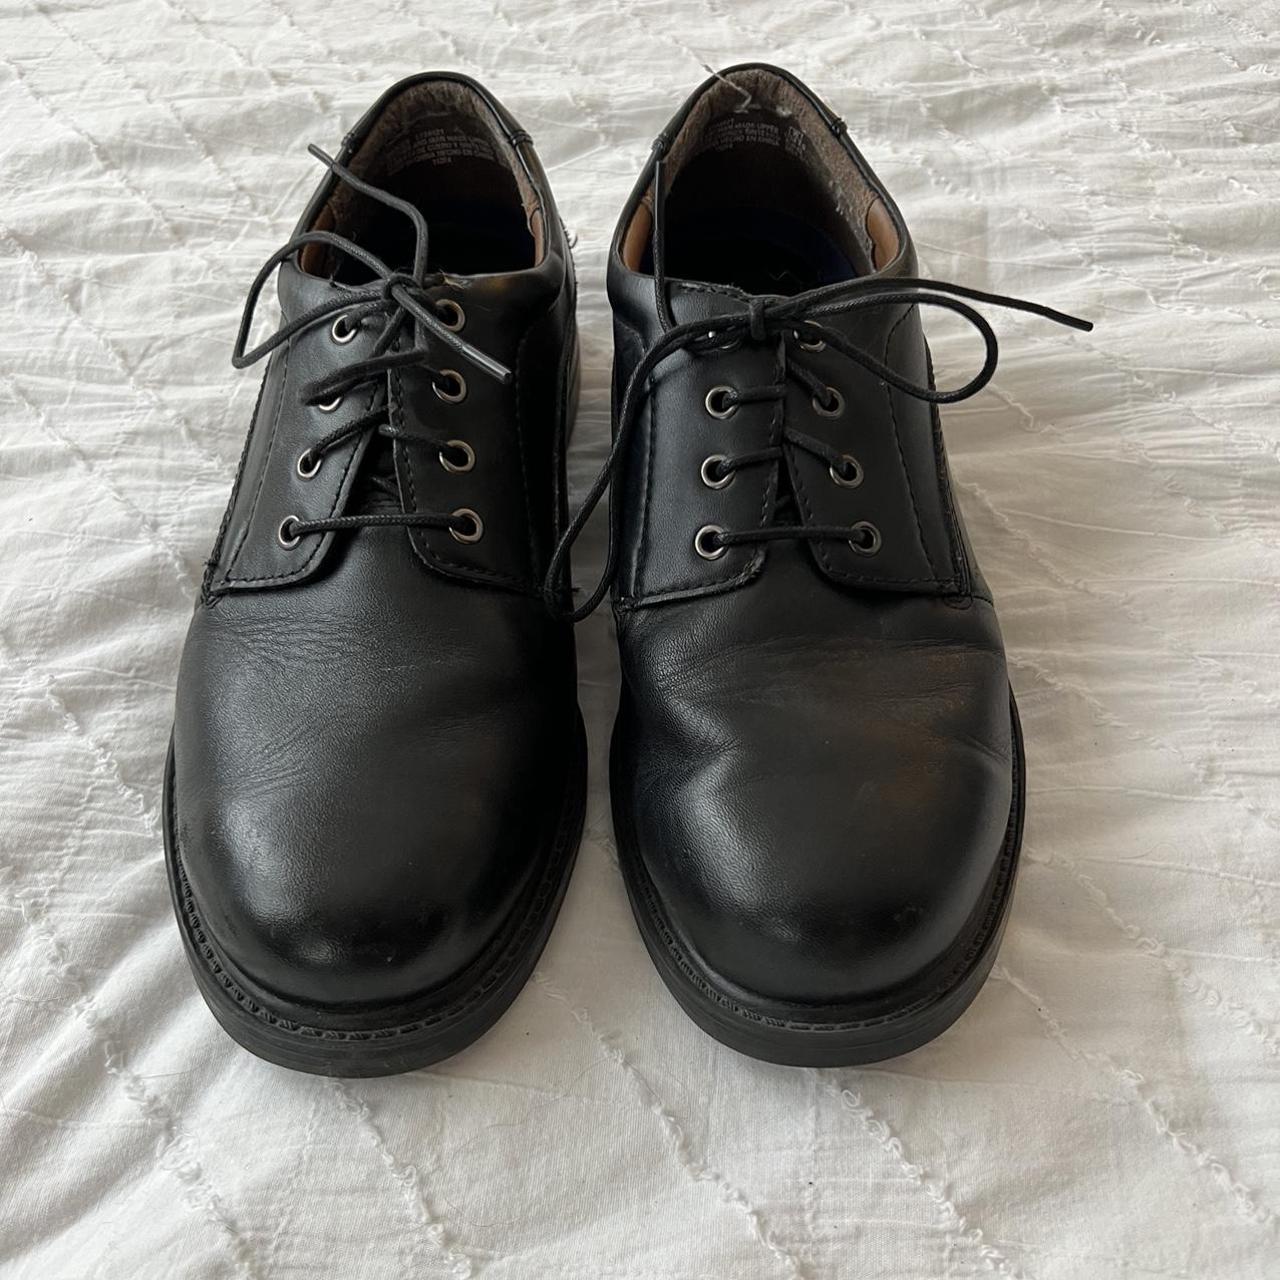 Women's Black and Silver Oxfords | Depop